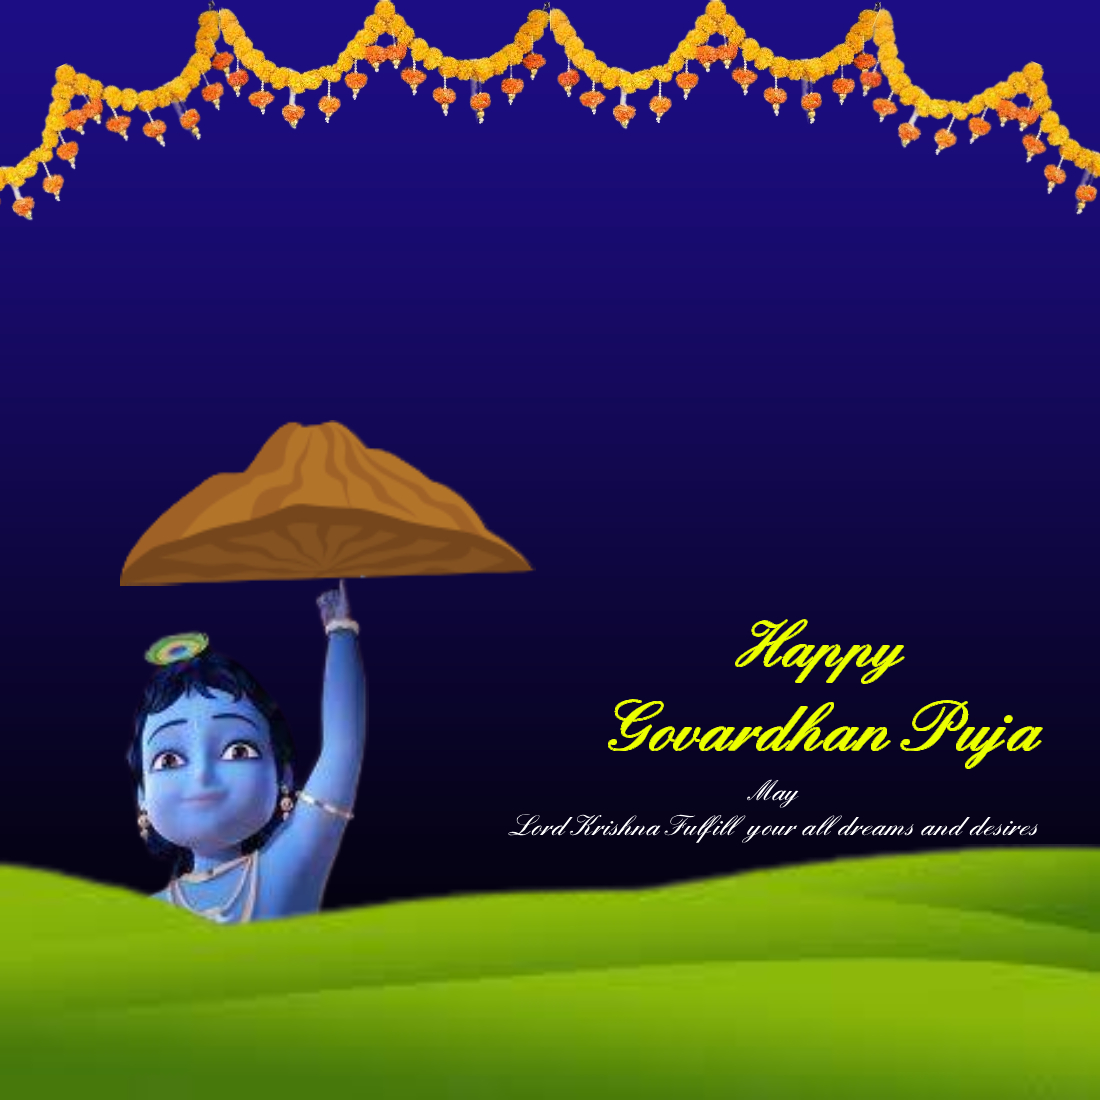 Govardhan puja template preview image.